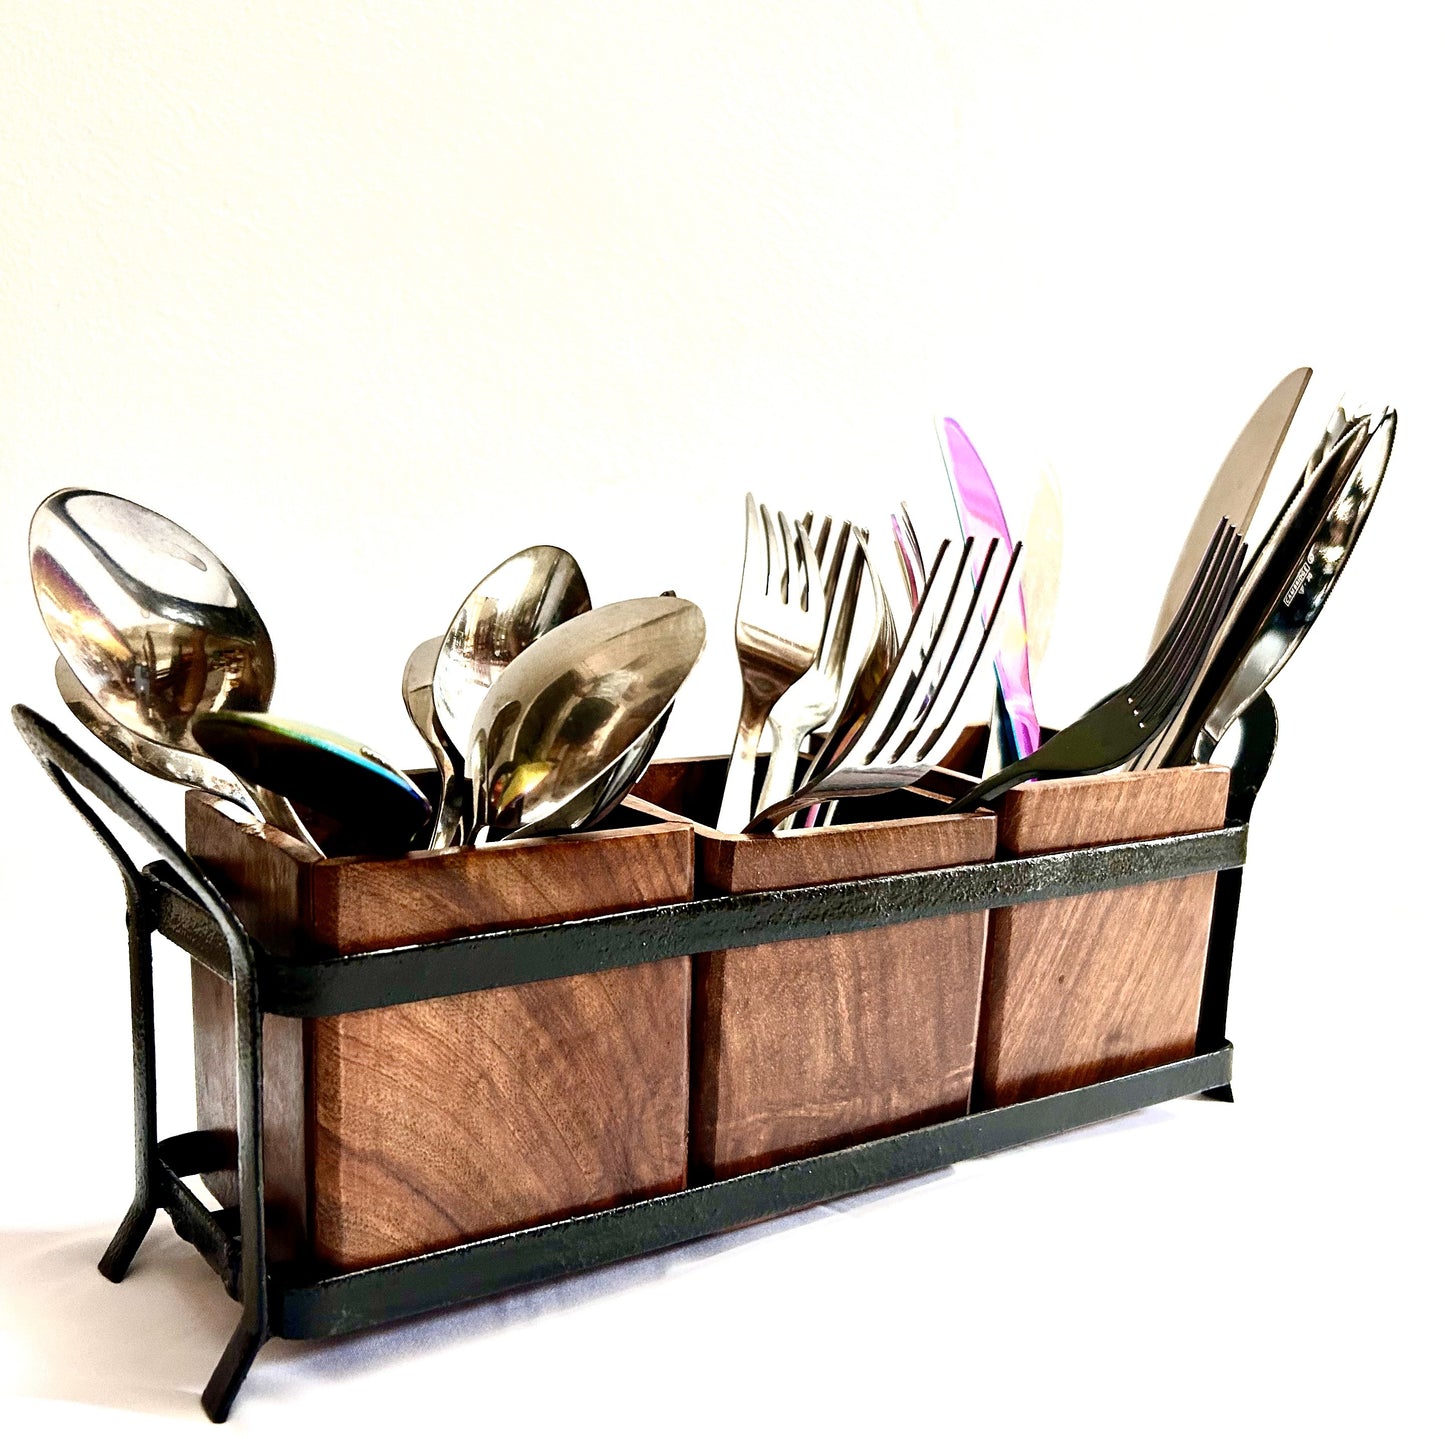 Wooden & Iron Cutlery Holder Wooden Organizer for Kitchen Countertops, Dining Table, Study Table, Office Table, Organizer for Forks, Knives, Spoons, Pens, Pencil, Stationery. Organizers that can be used to organize cutlery for kitchen countertops and dining tables; for pens, pencils, markers or other stationery objects for your study and office tables; and for makeup stuffs for your dressing table. Rustic decor accessories, gifting for birthday, wedding anniversary, housewarming.